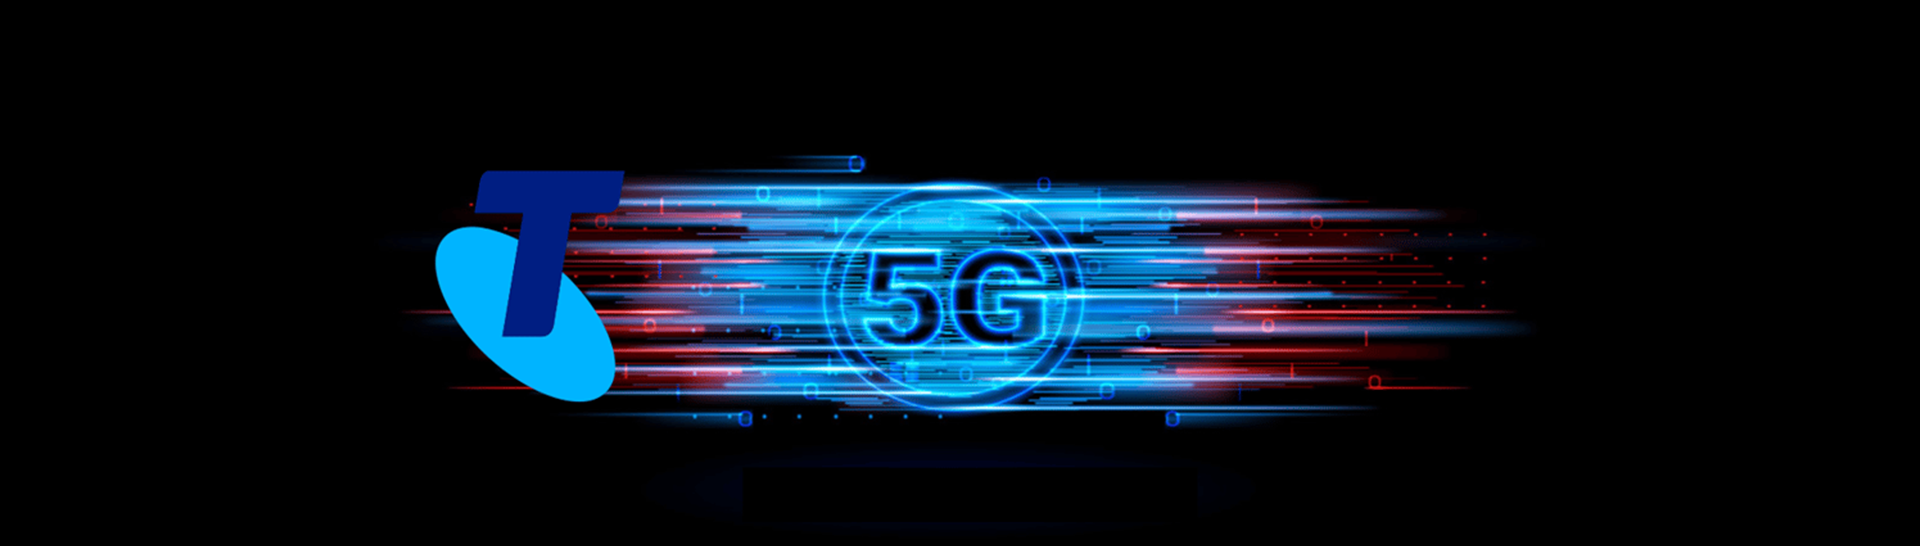 Telstra is first with 5G Standalone Network resized